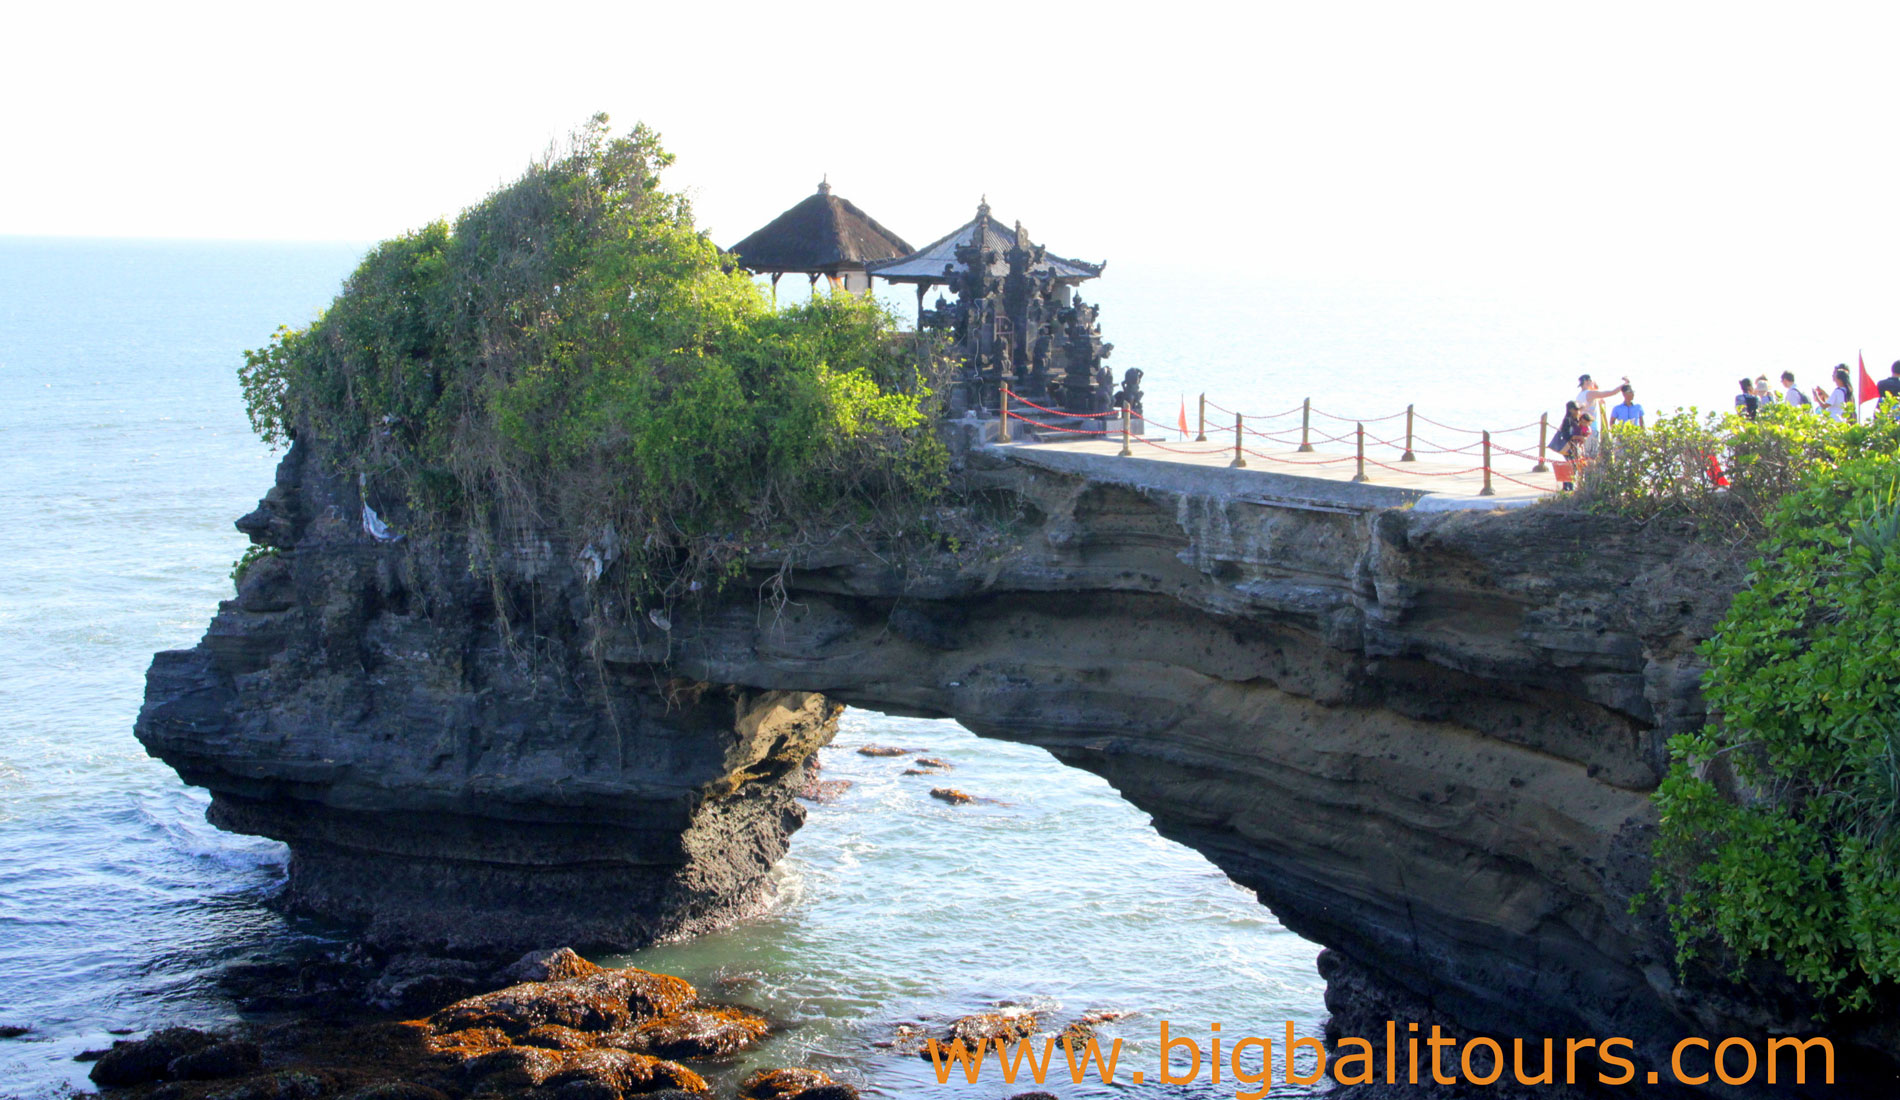 Tanahlot - Bali Private Transport and Tour in Bali